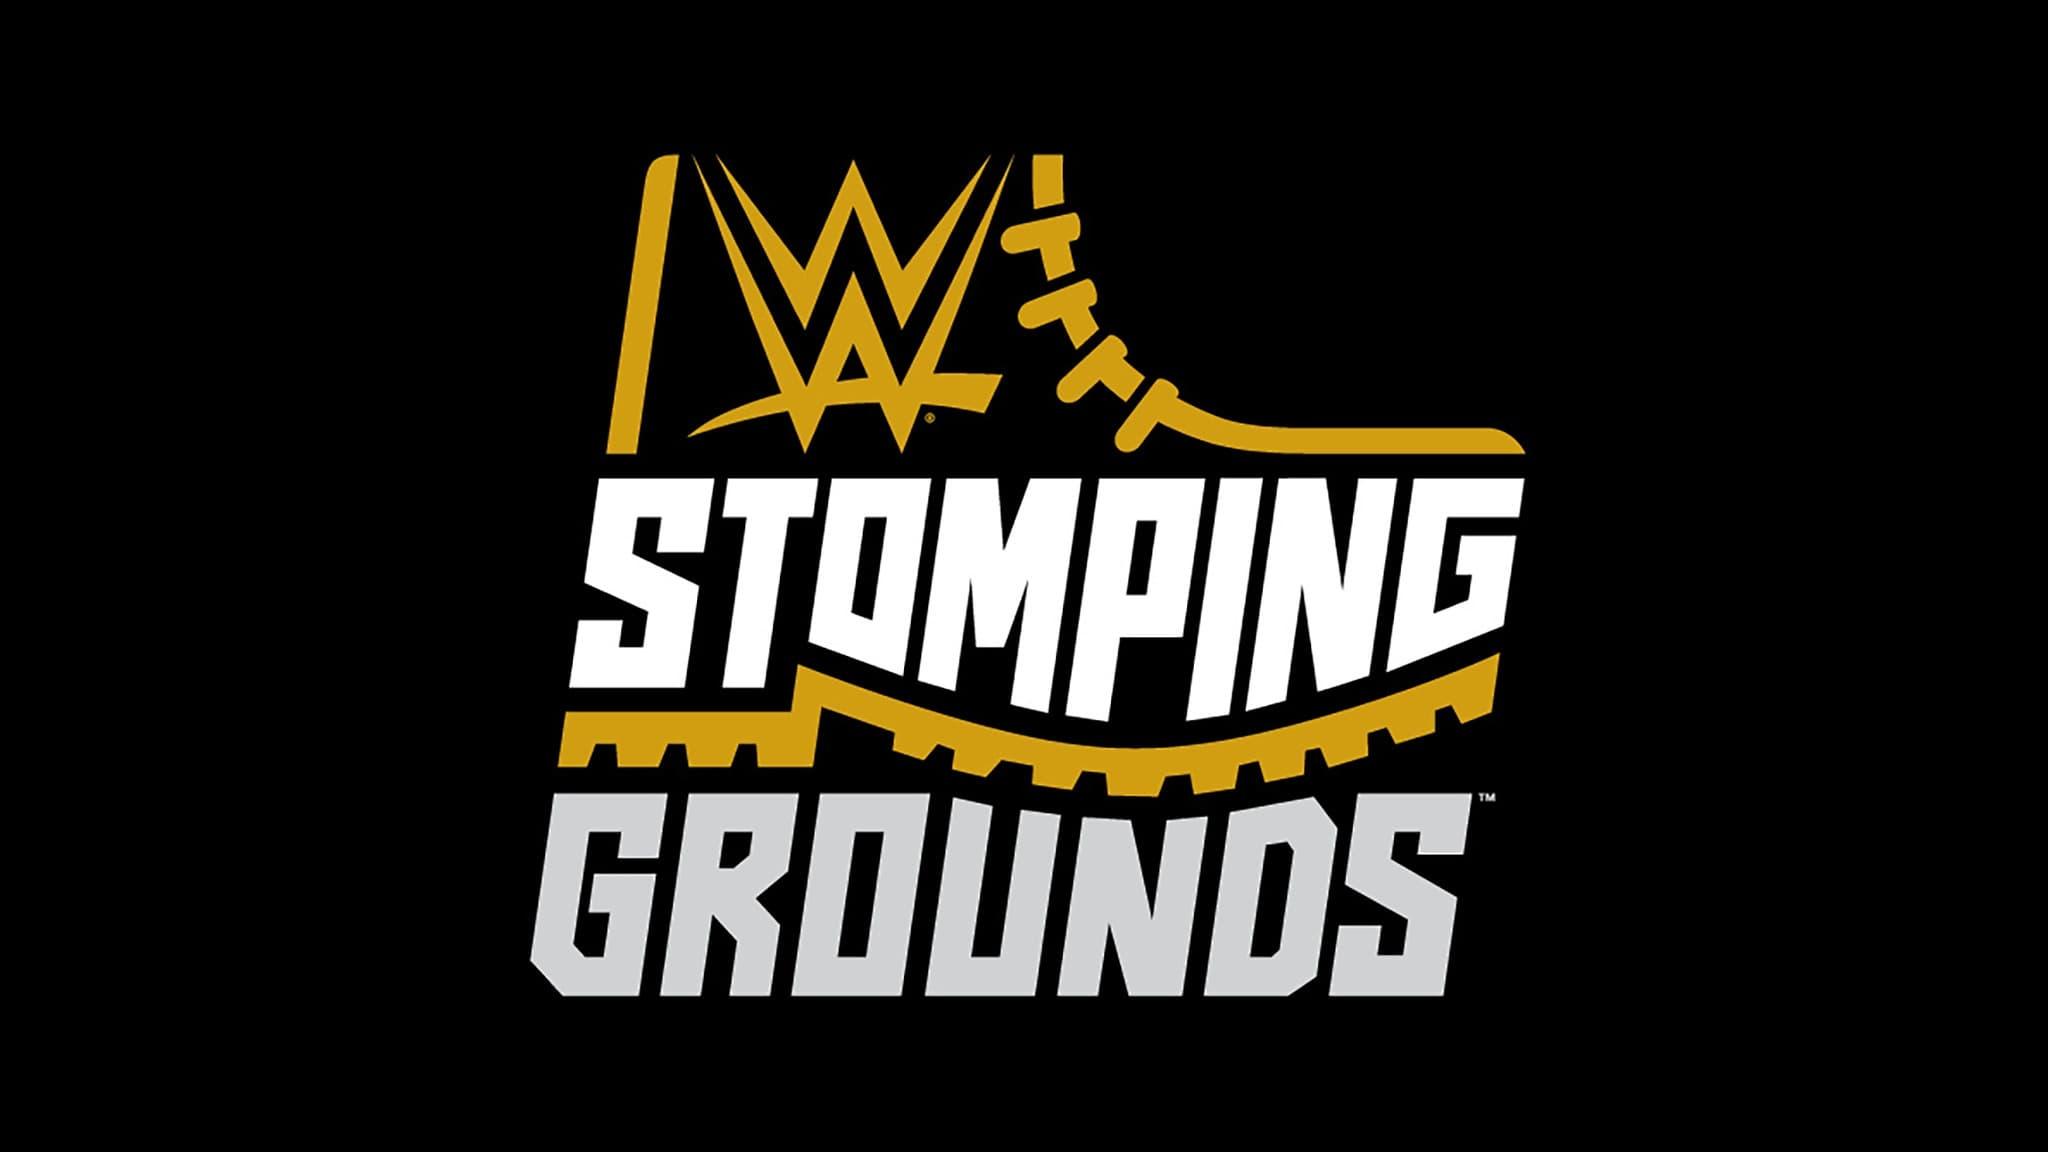 WWE Stomping Grounds backdrop